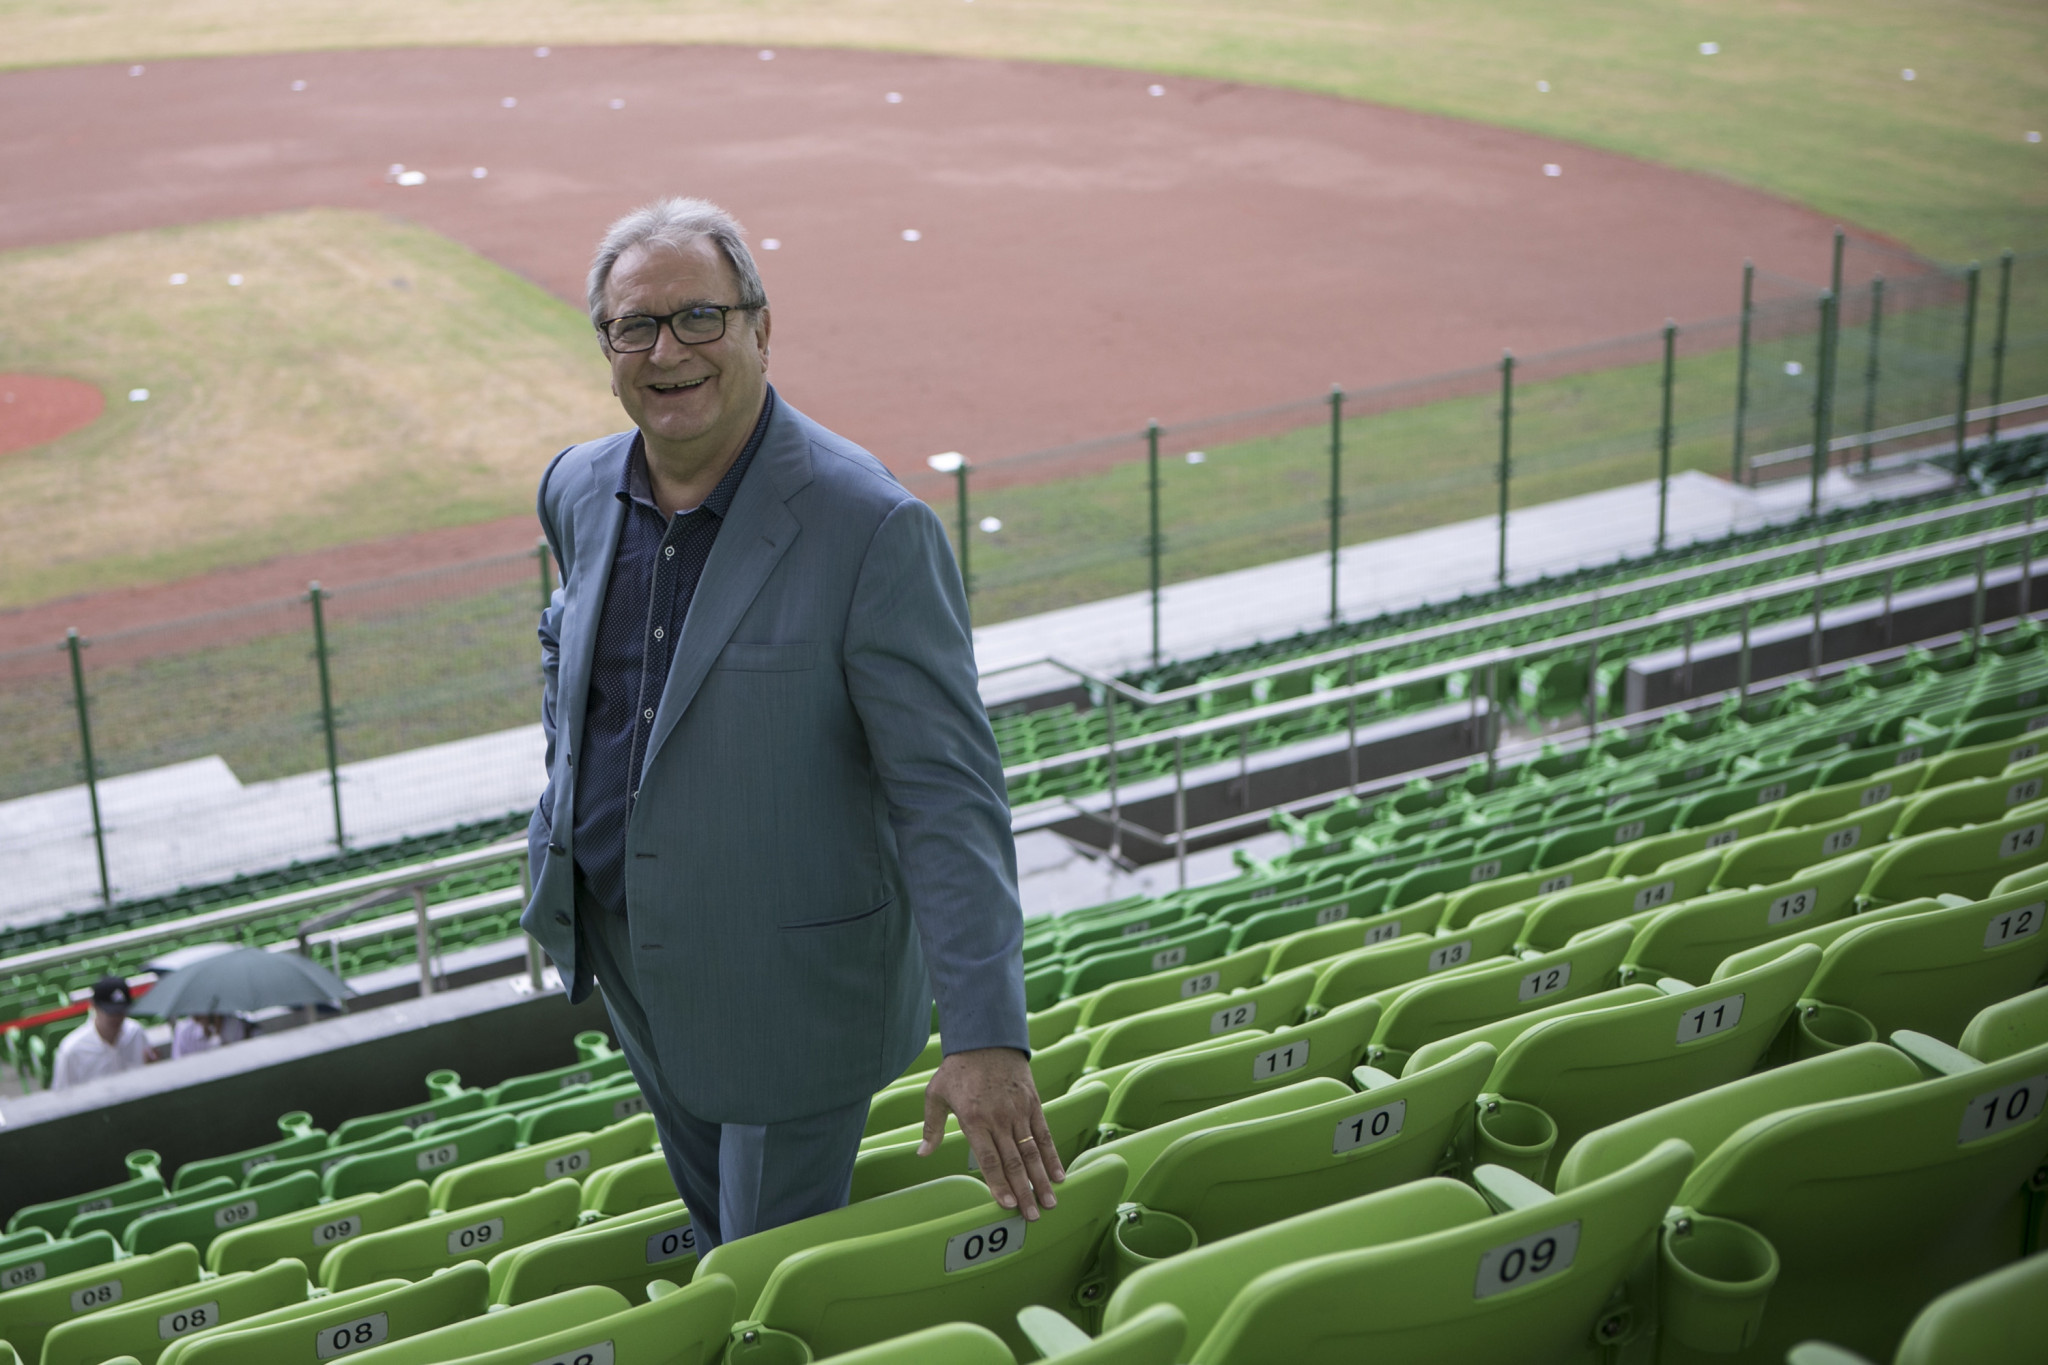 WBSC President Riccardo Fraccari reaffirmed his commitment to young people in the baseball and softball community ©Getty Images